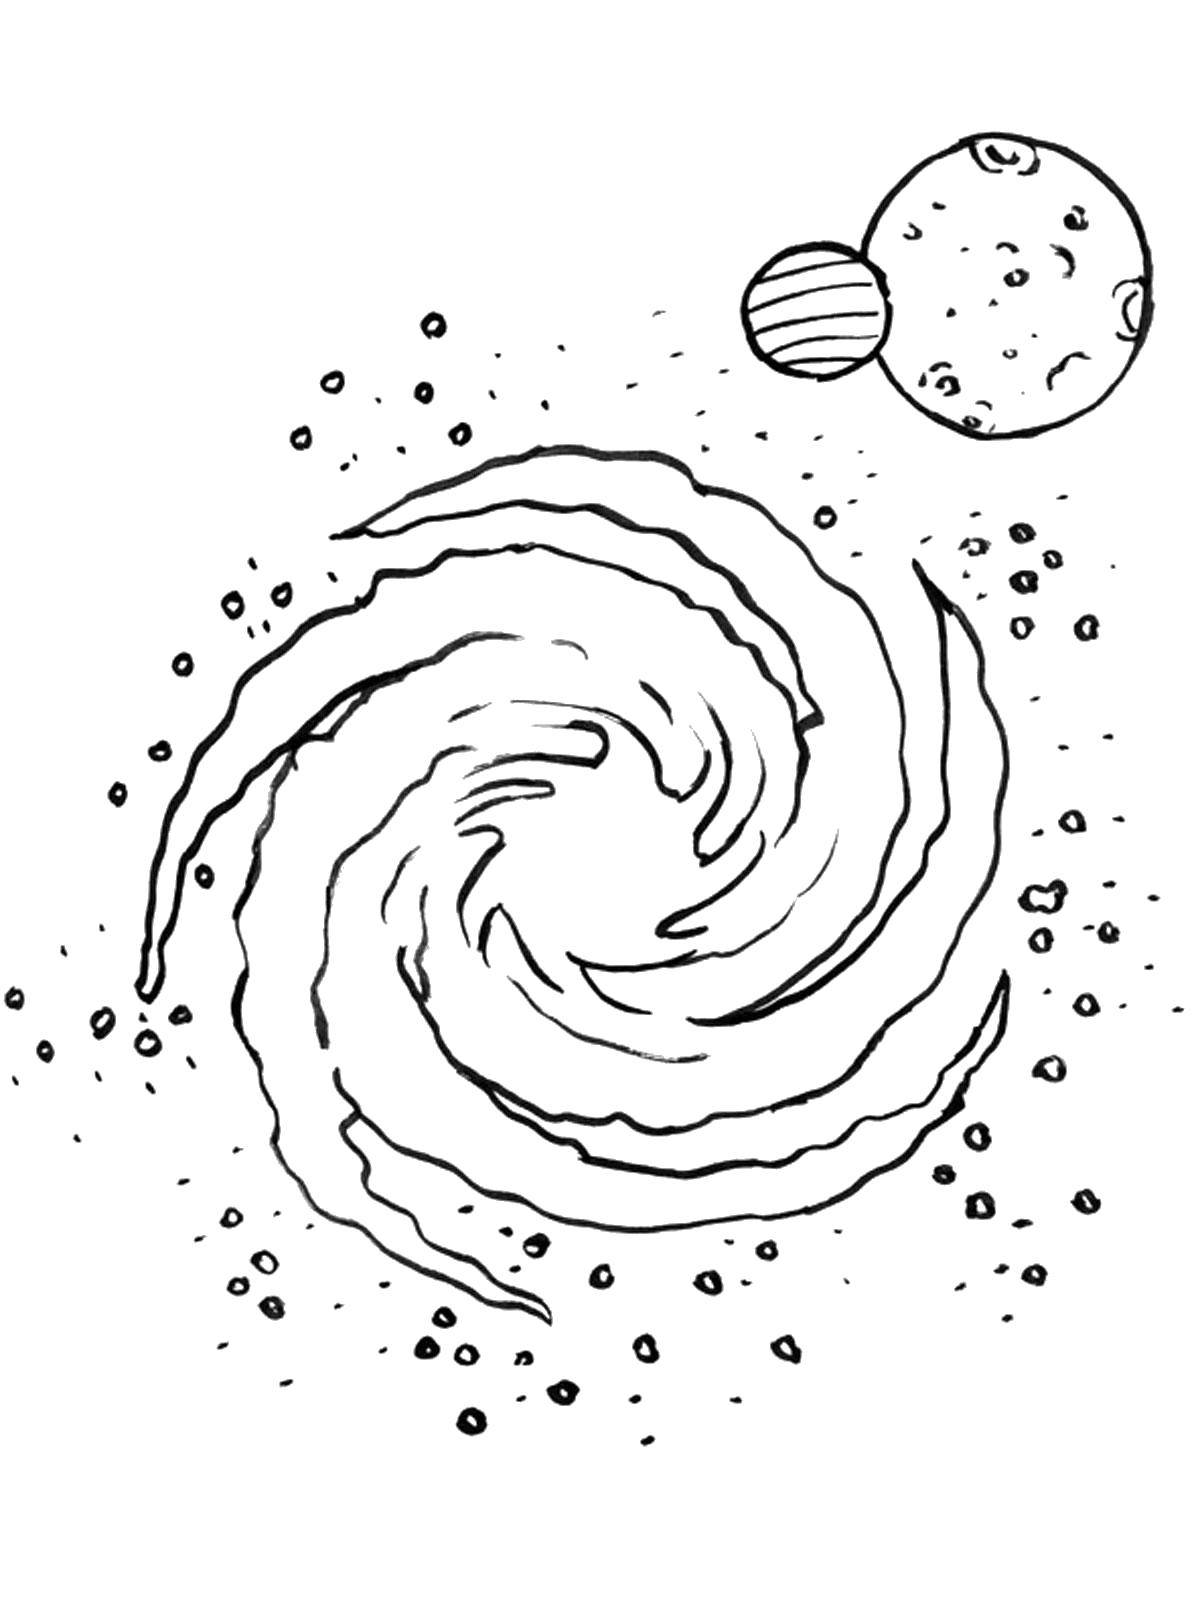 Coloring Galaxy and planets. Category space. Tags:  Have kosmak, planet, universe, Galaxy.